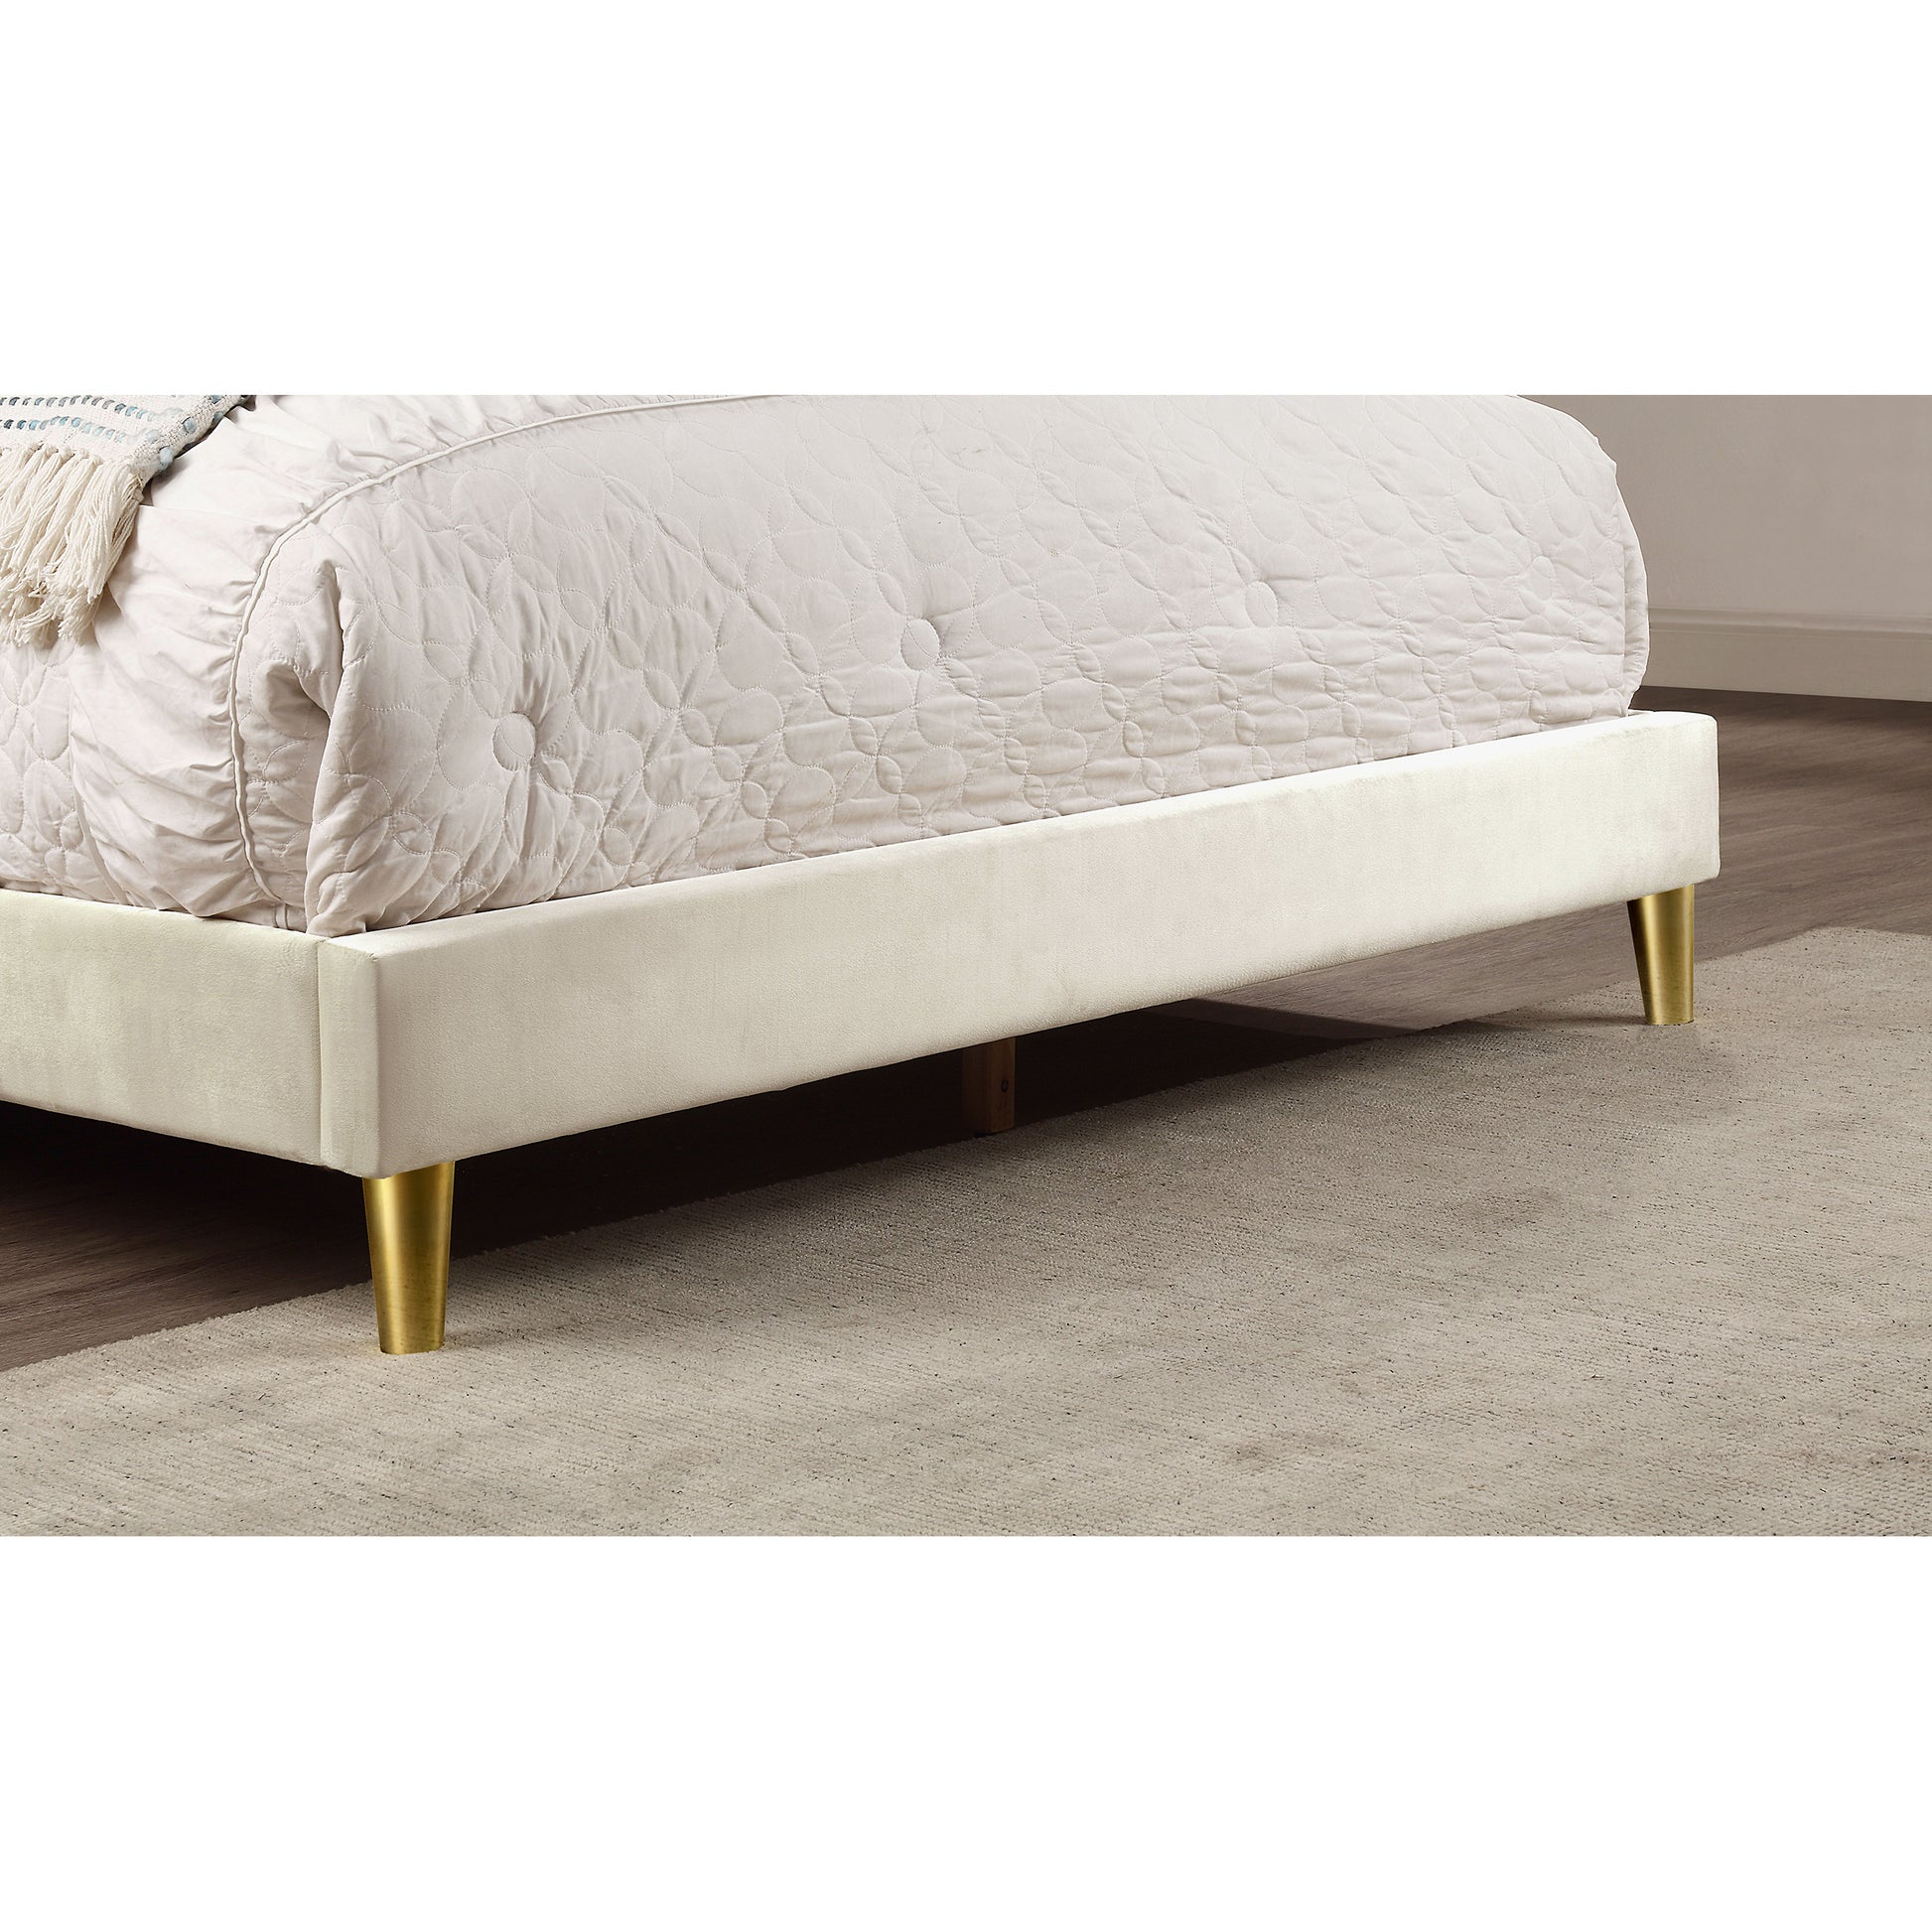 Right angled footboard close-up of a contemporary beige and gold upholstered eastern king bed in a bedroom with accessories